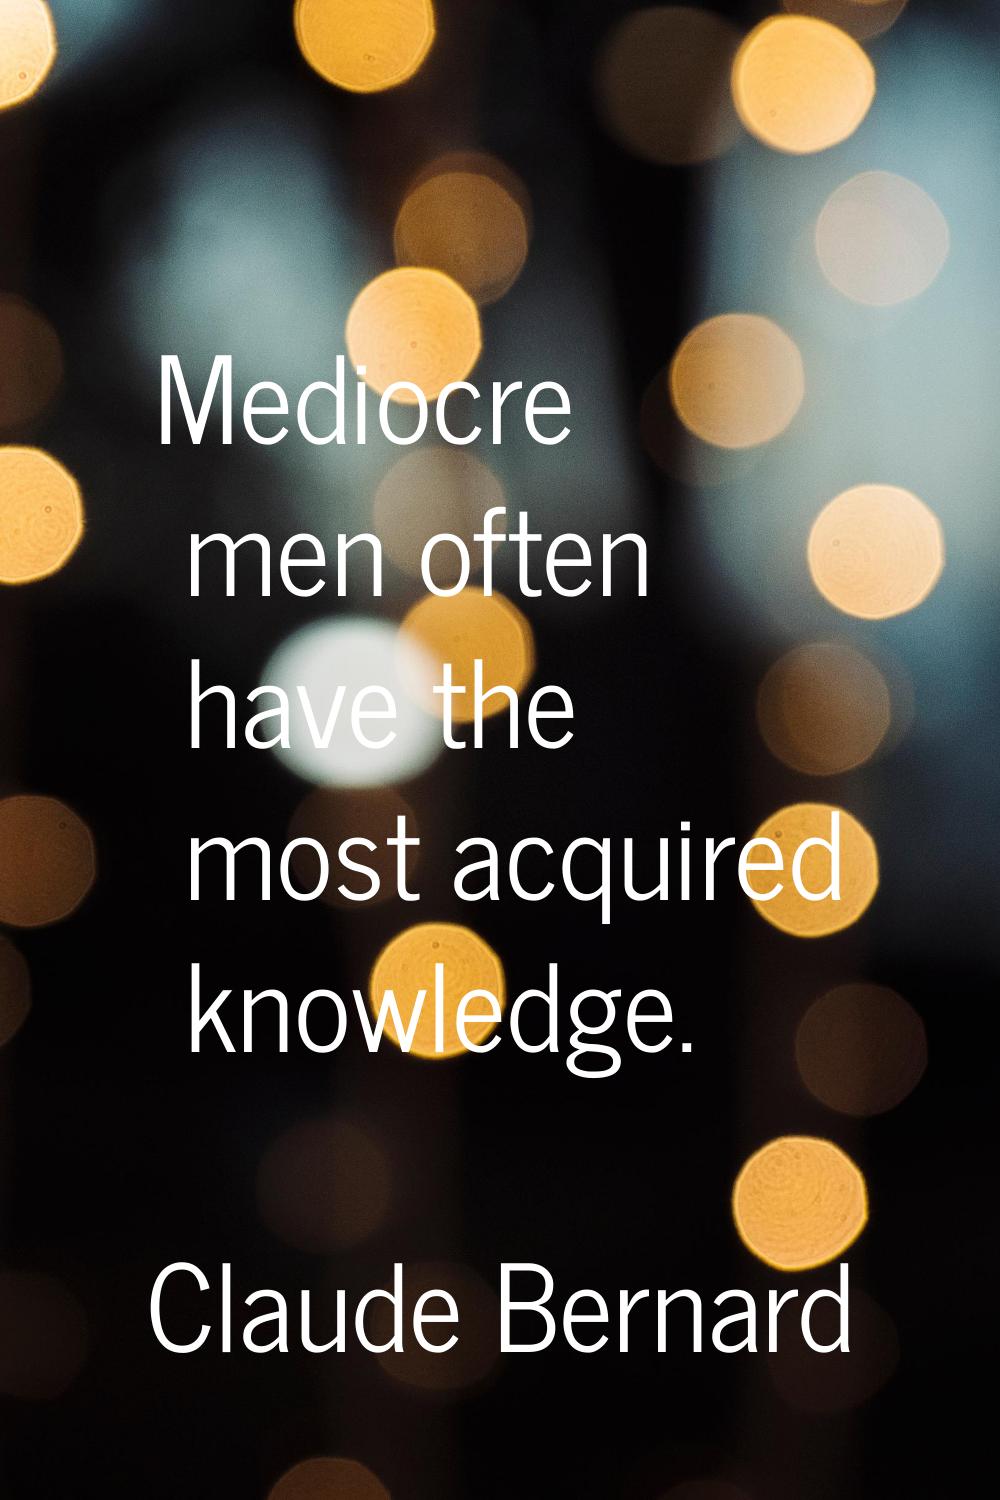 Mediocre men often have the most acquired knowledge.